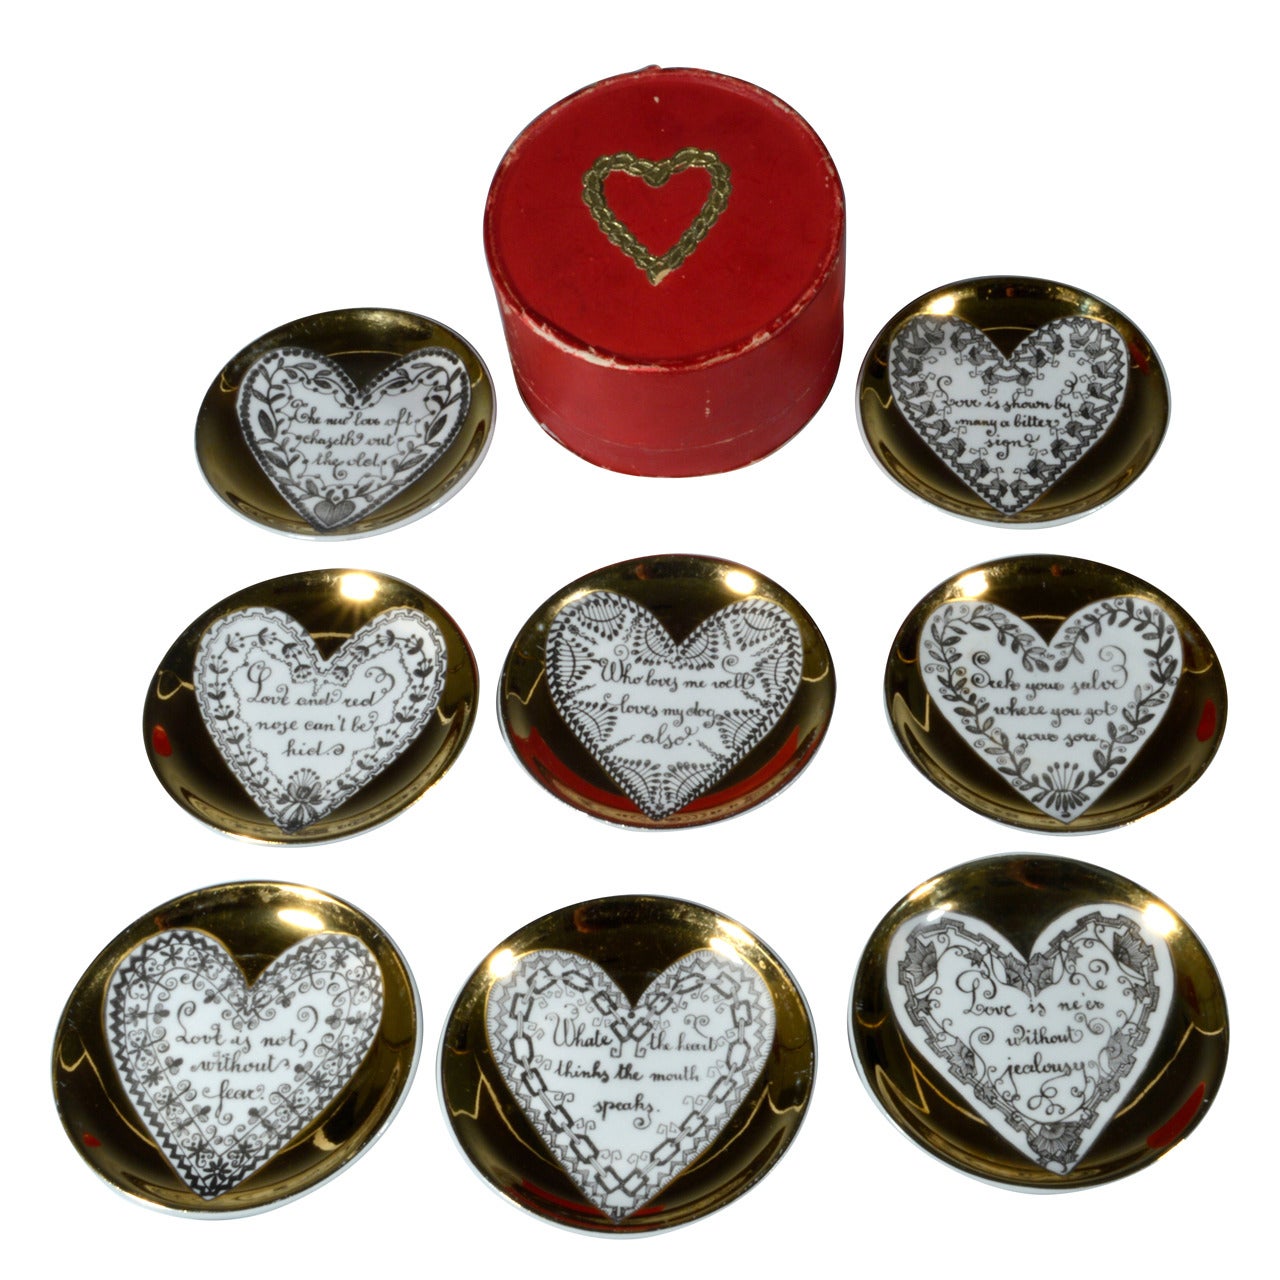 Piero Fornasetti Porcelain Boxed Coaster Set with Love, Hearts and Sayings